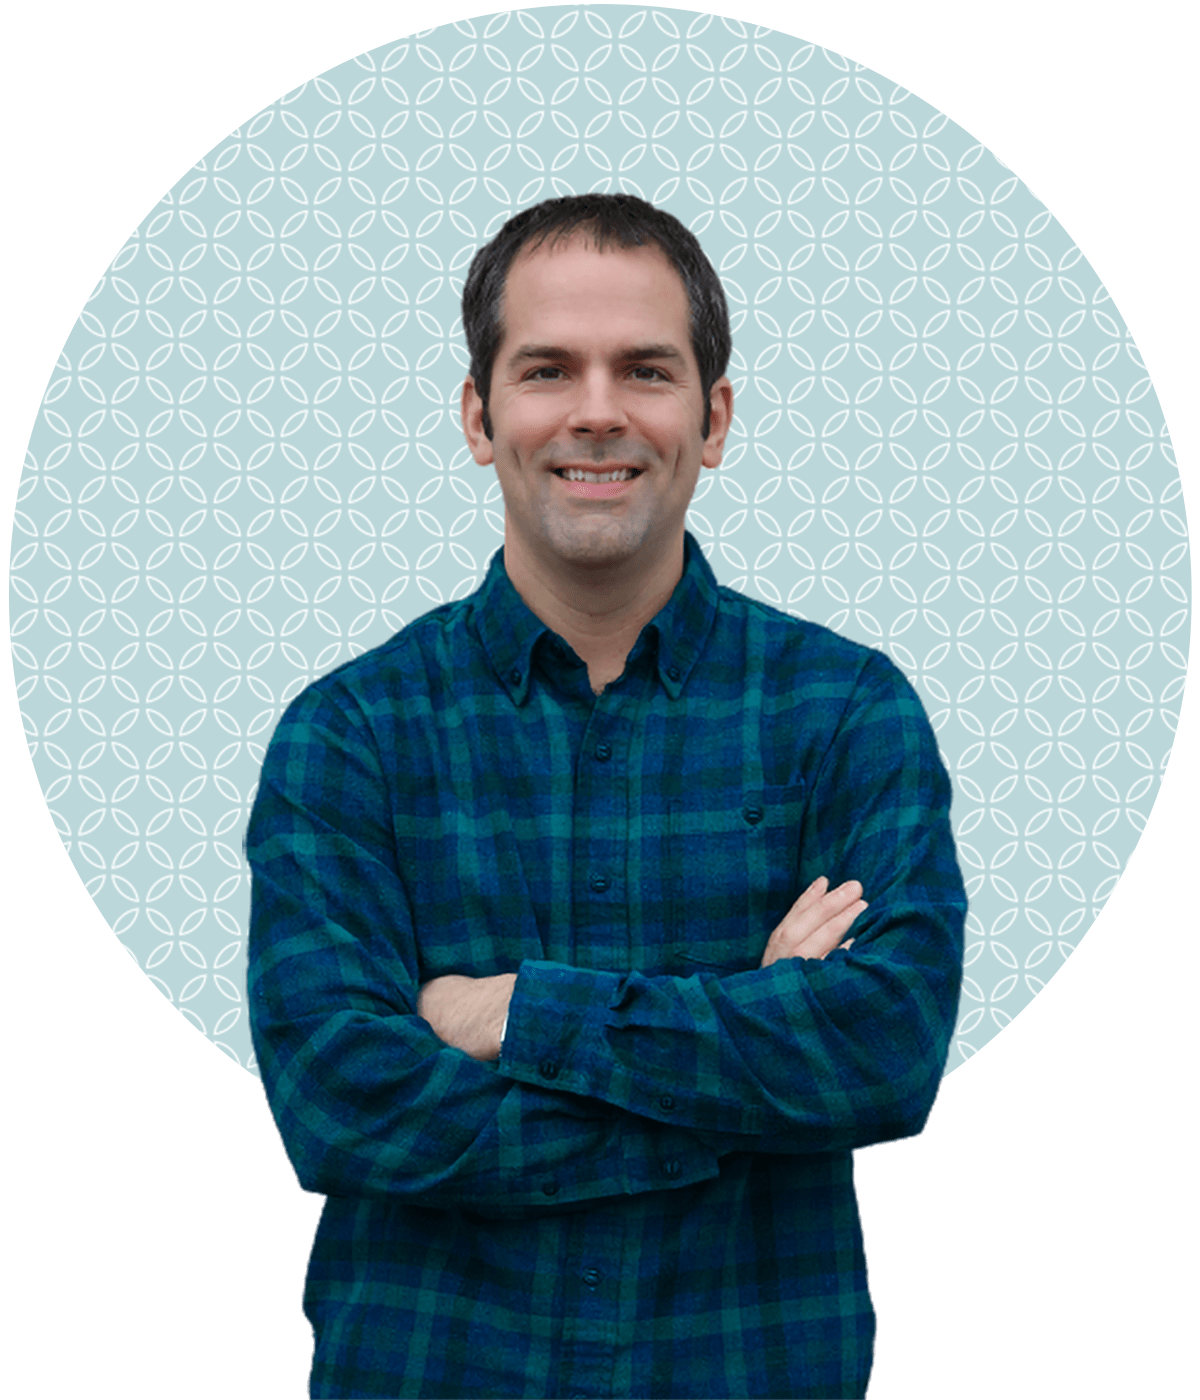 Brian Moselle, Certified Functional Medicine Practitioner